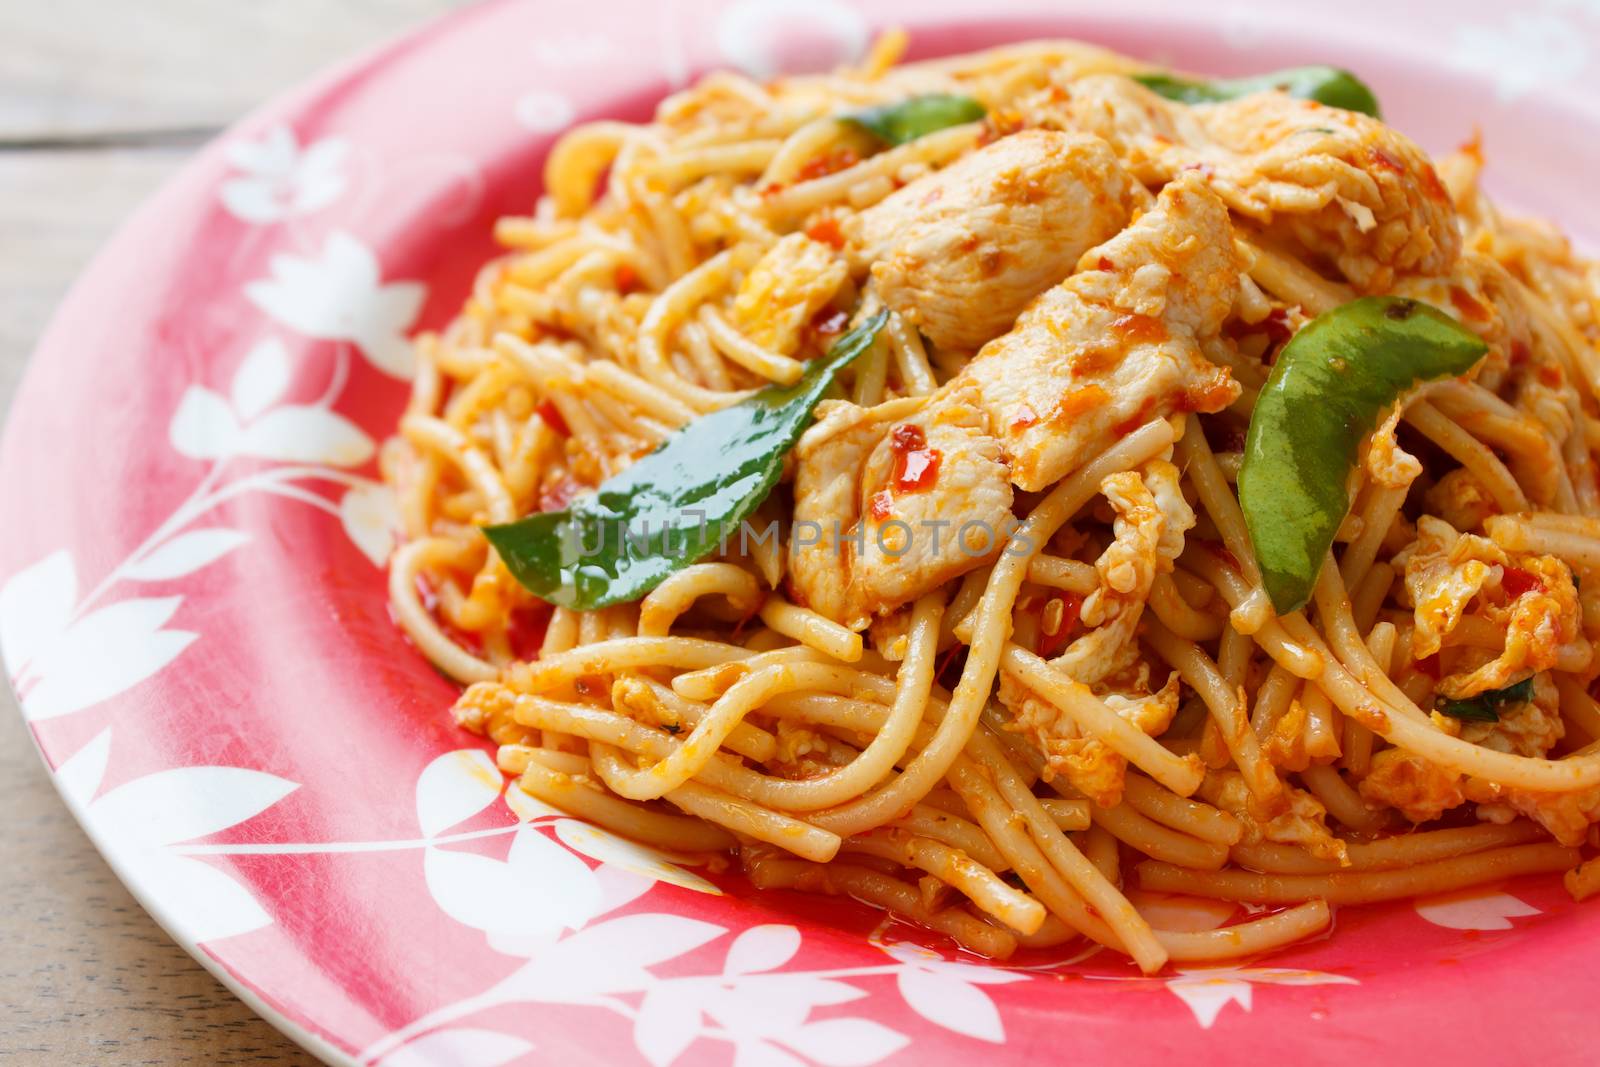 Stir Fried Spaghetti with Chicken in Chilli paste by vitawin